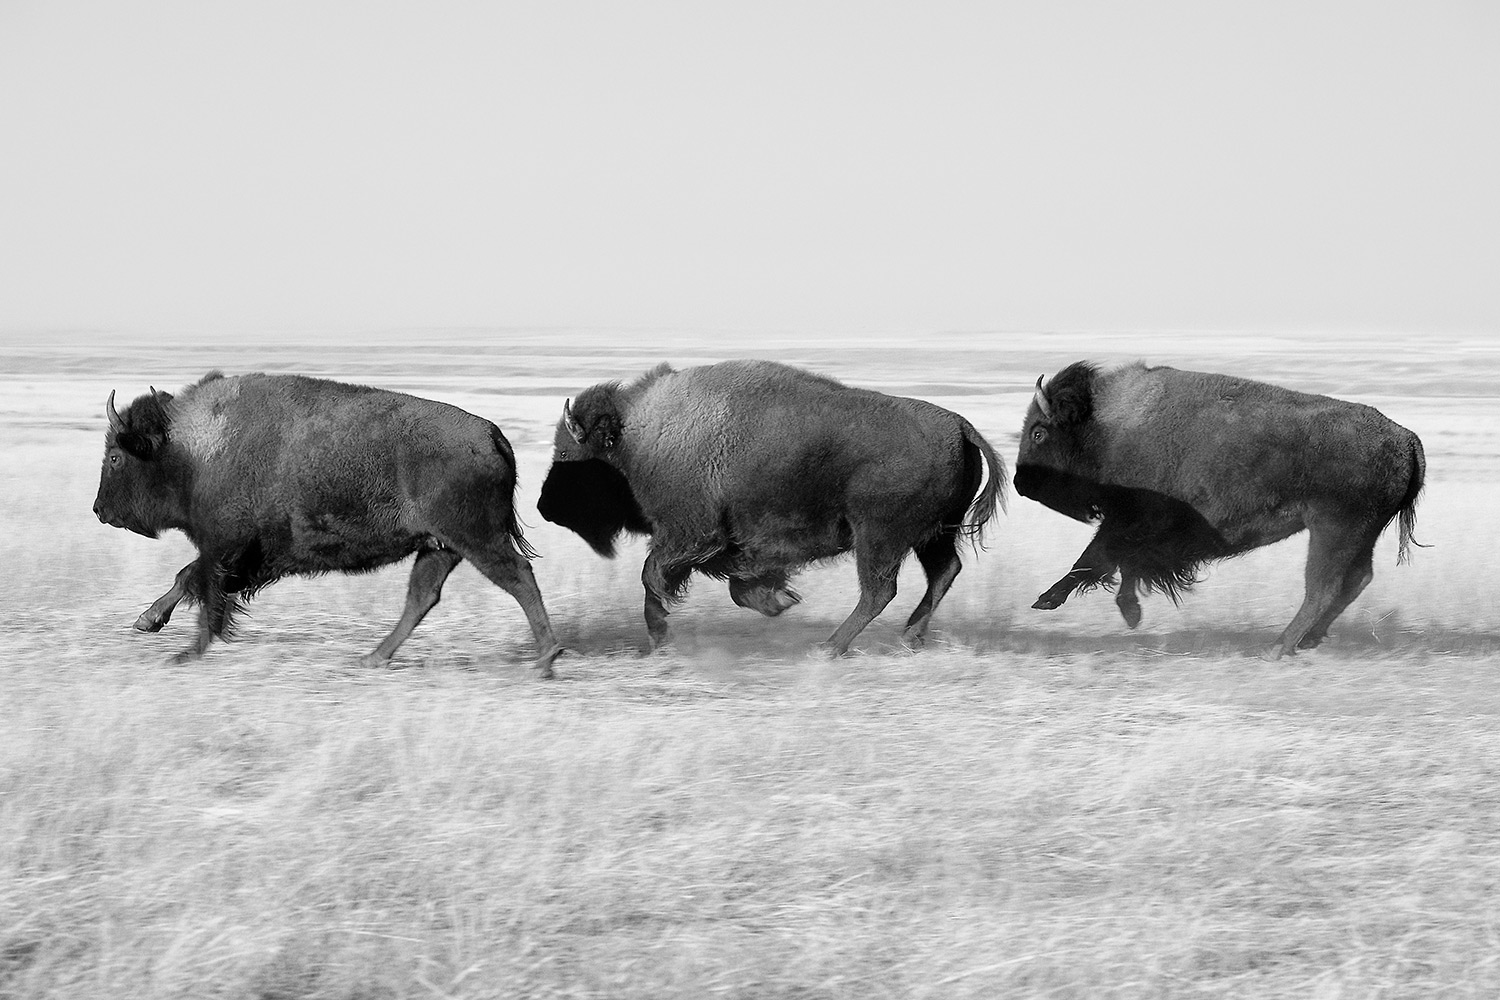 Three bison (or buffalo as they are known locally) dash across the open prairie in front of me on the Fort Belknap Indian Reservation in Montana.&nbsp;→ Buy a Print&nbsp;or&nbsp;License Photo